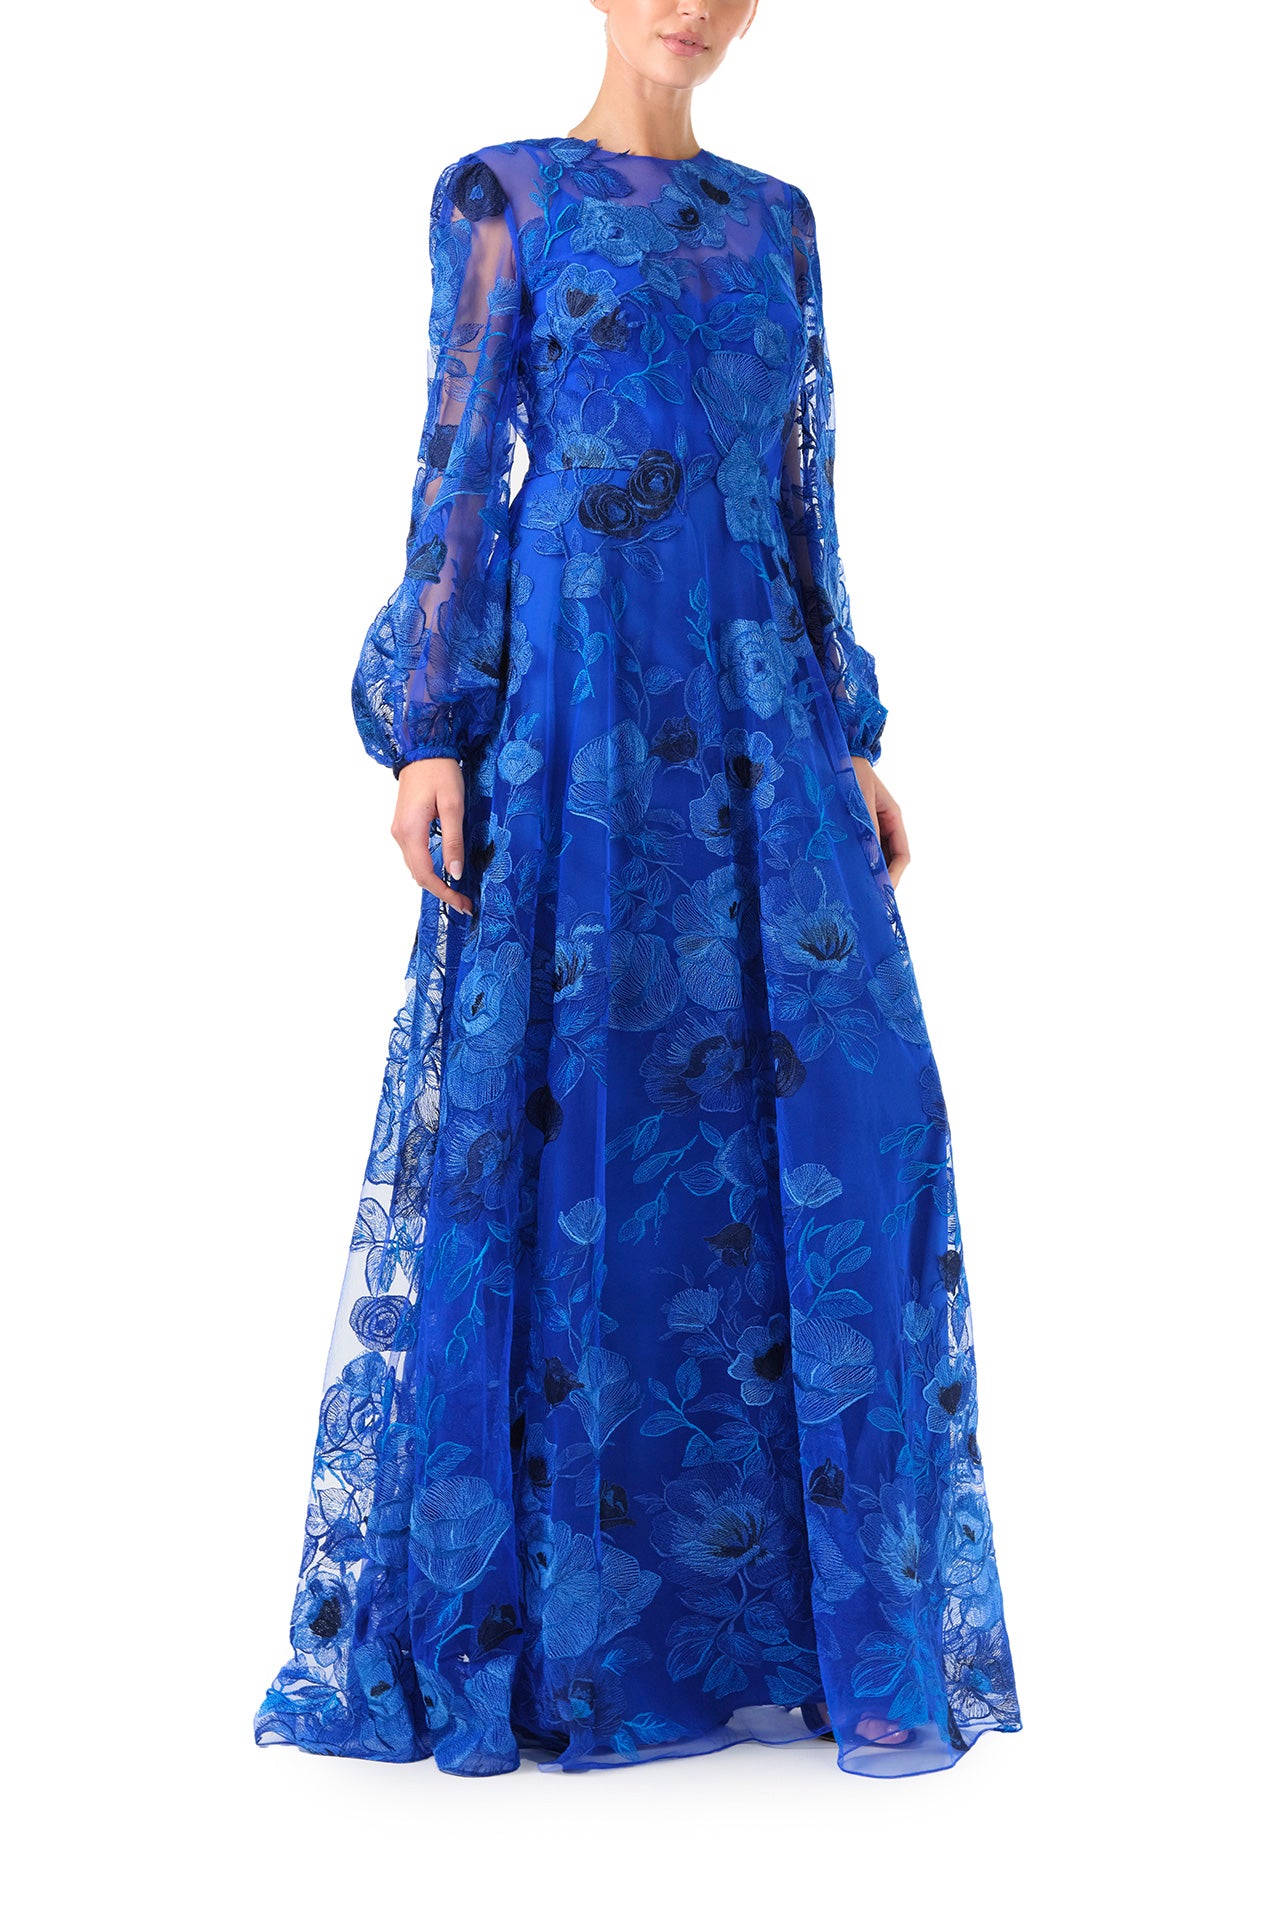 Monique Lhuilier Spring 2024 royal blue embroidered tulle long sleeve column gown with jewel neckline and detached slip lining - right side.